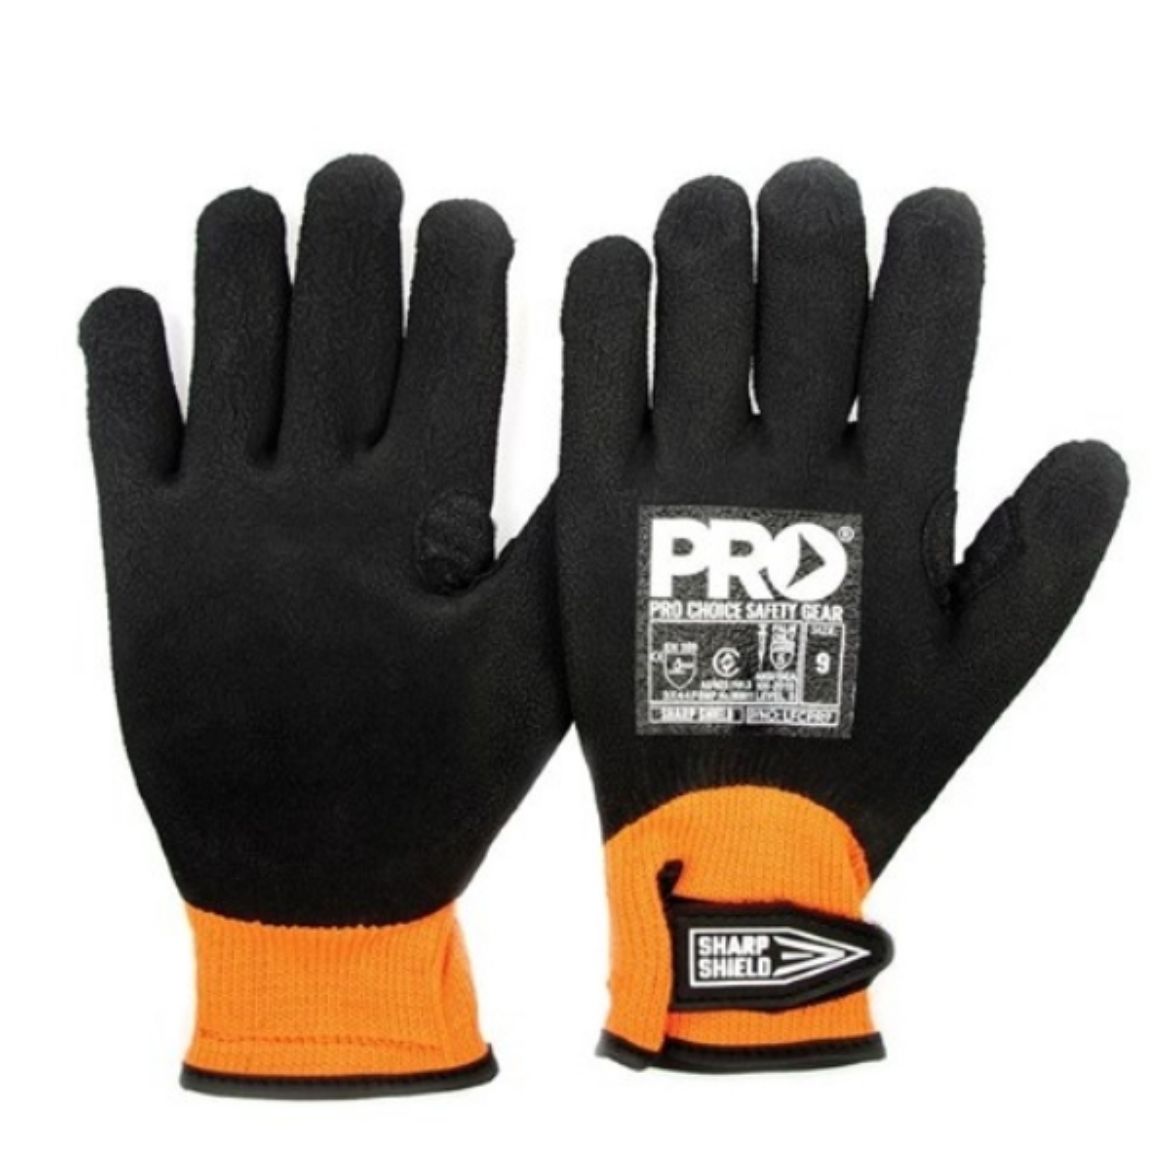 Picture of SHARP SHIELD BLACK LATEX FULL DIP ORANGE COTTON LINER NEEDLE & CUT RESISTANT PALM. AVAILABLE IN SIZES 7/8/9/10/11/12